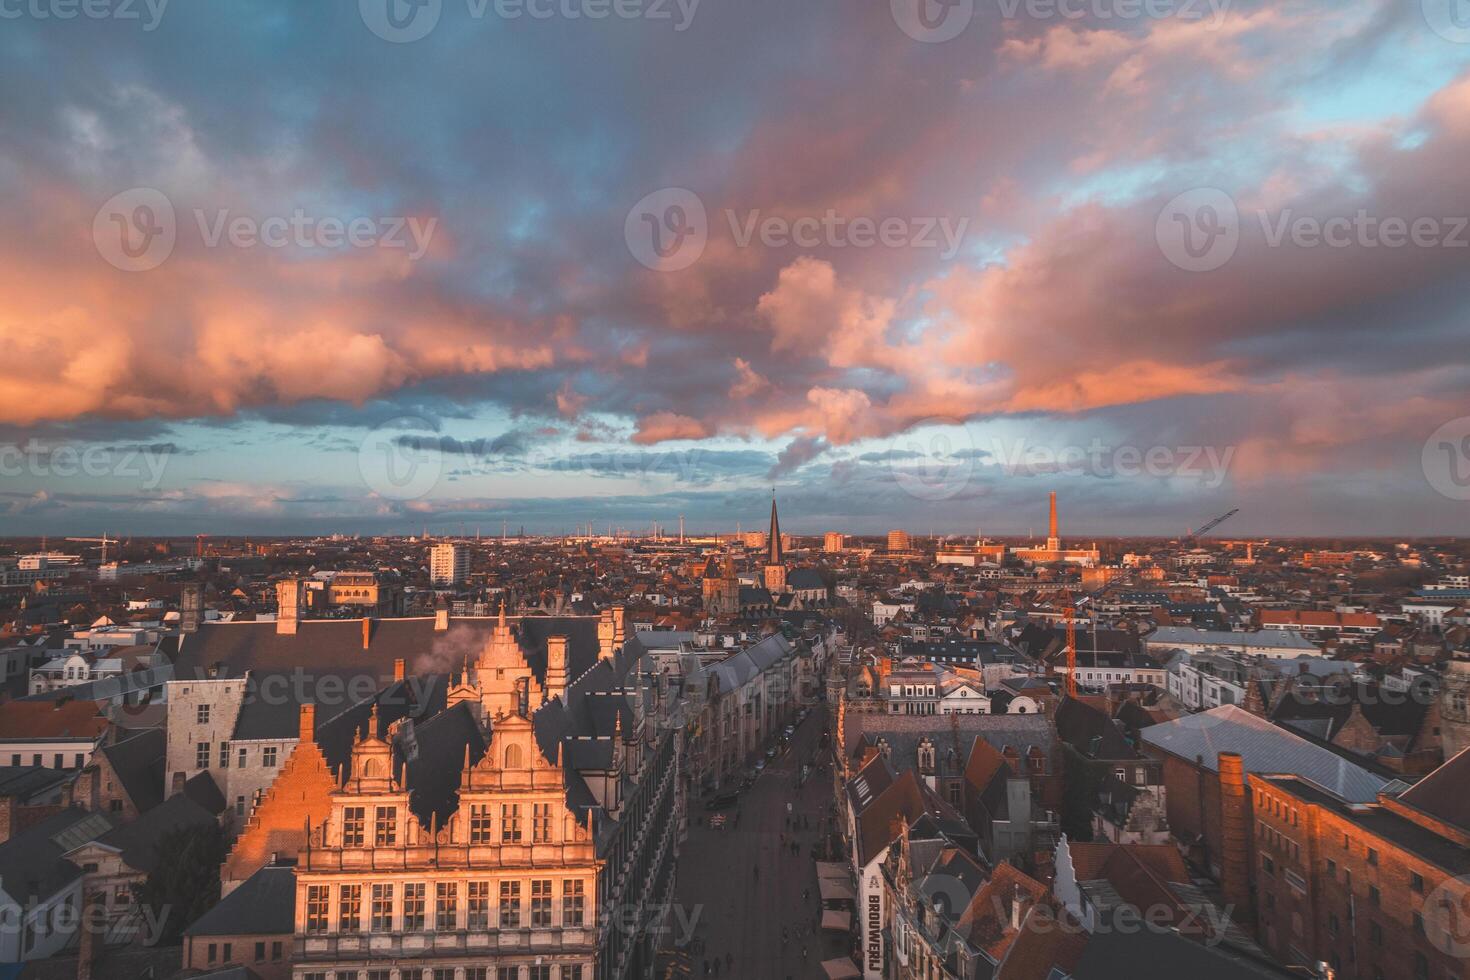 Watching the sunset over Ghent from the historic tower in the city centre. Romantic colours in the sky. Red light illuminating Ghent, Flanders region, Belgium photo